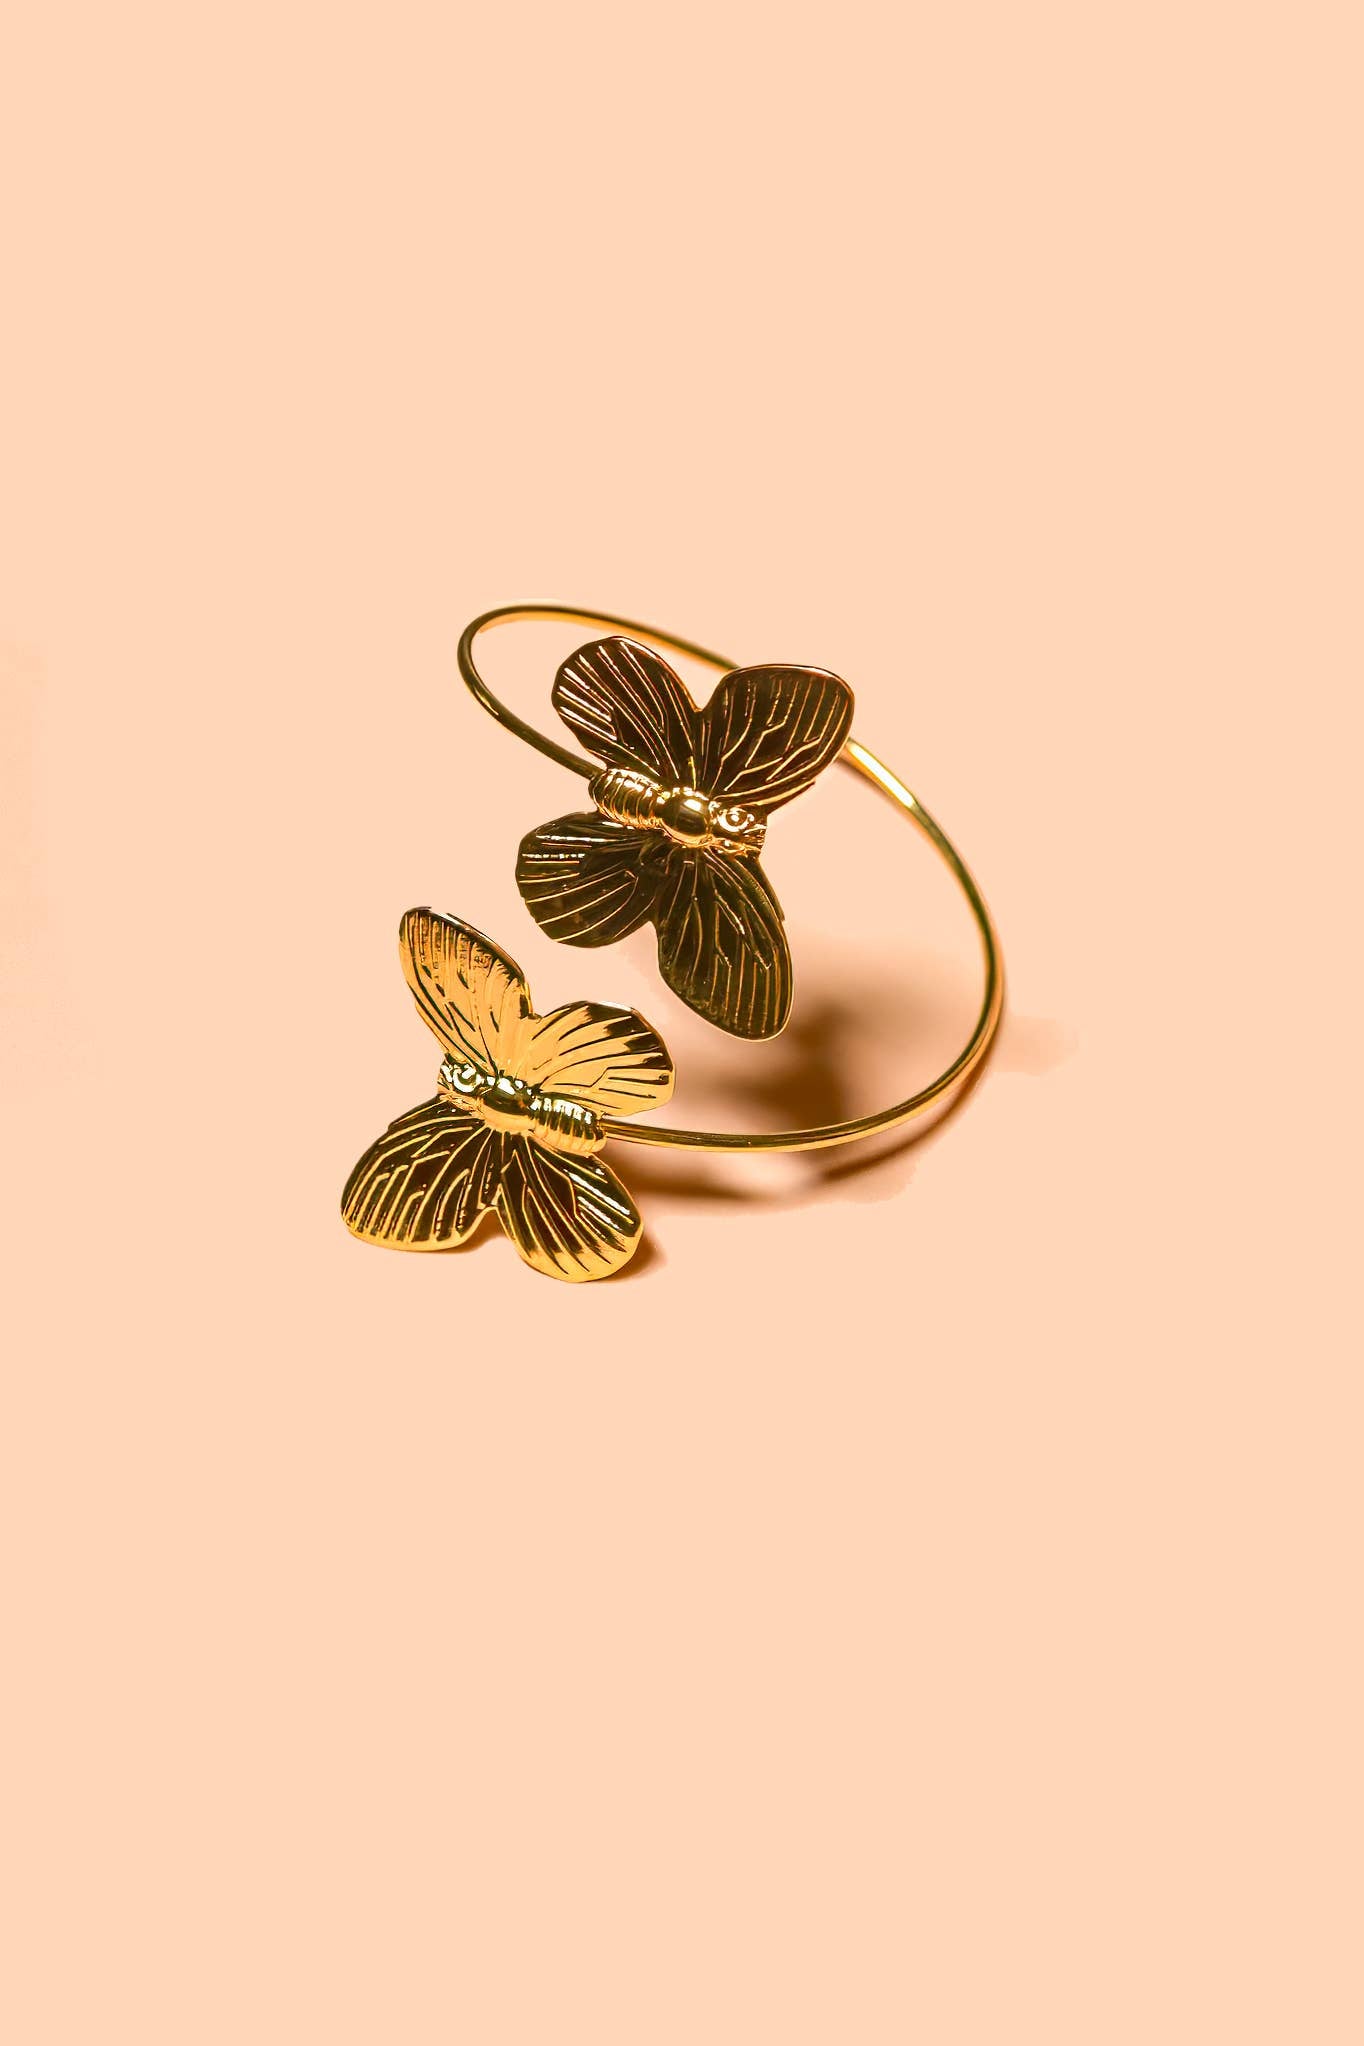 I'll Fly Away Cuff - 18K Gold Plated - Out of the Blue